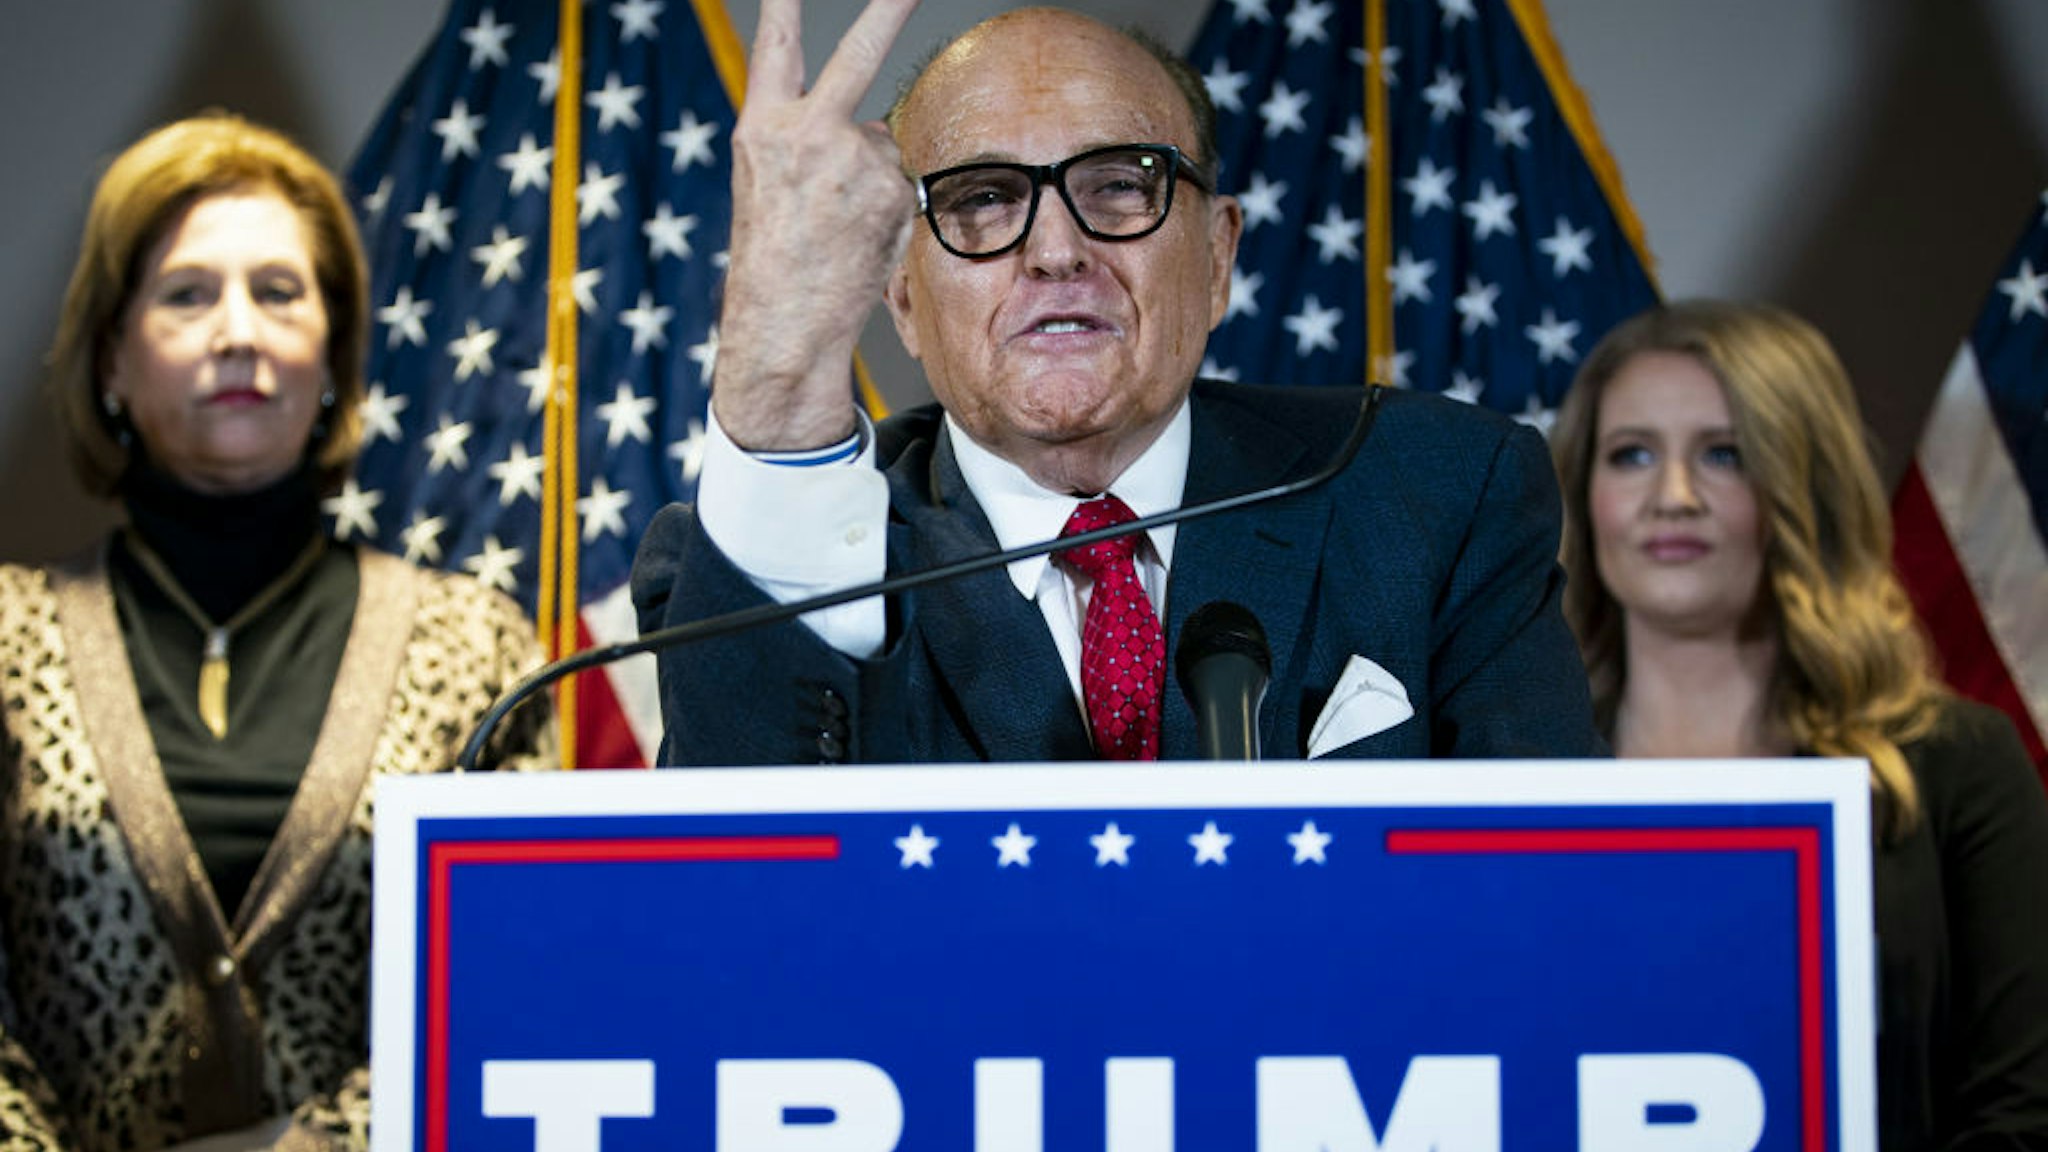 Rudy Giuliani, personal lawyer to U.S. President Donald Trump, speaks during a news conference at the Republican National Committee headquarters in Washington, D.C., U.S., on Thursday, Nov. 19, 2020.